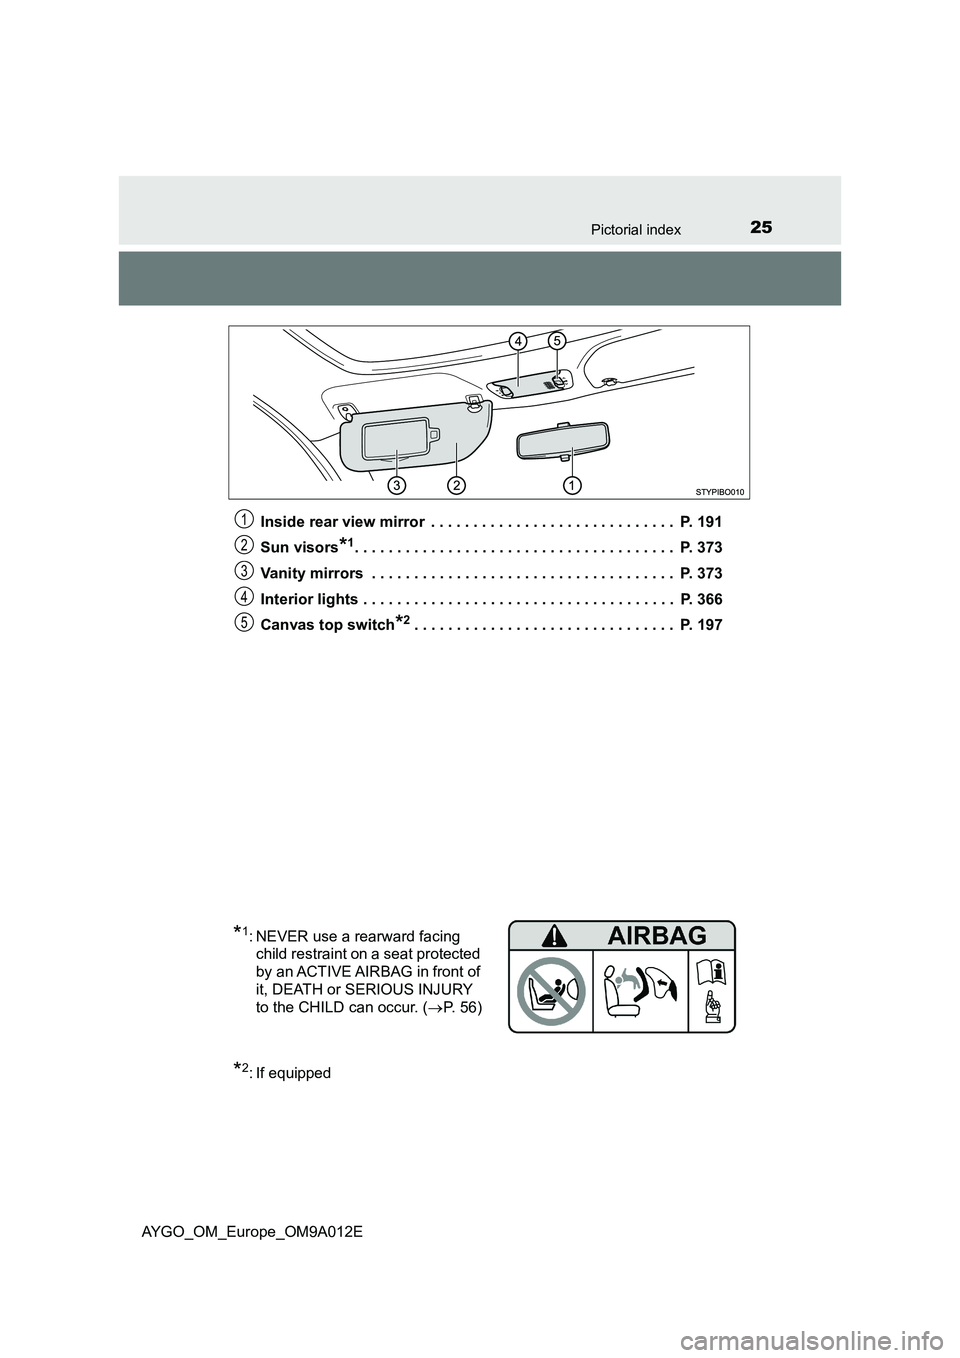 TOYOTA AYGO 2021  Owners Manual 25Pictorial index
AYGO_OM_Europe_OM9A012E 
Inside rear view mirror  . . . . . . . . . . . . . . . . . . . . . . . . . . . . .  P. 191 
Sun visors*1. . . . . . . . . . . . . . . . . . . . . . . . . . .